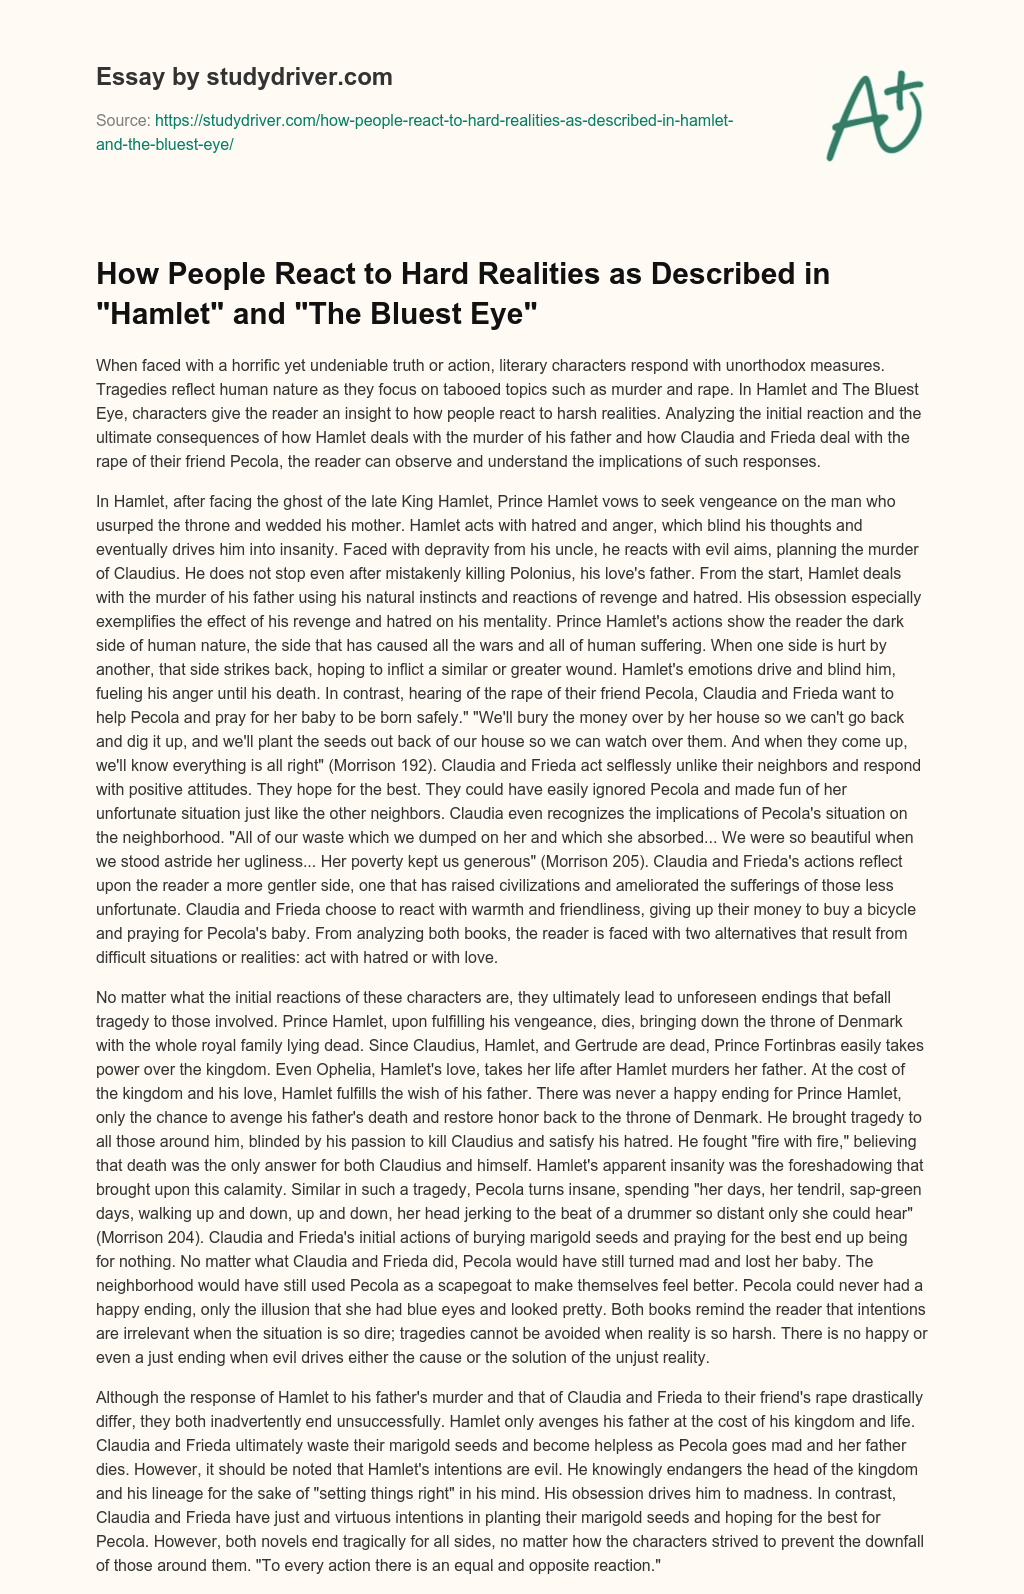 How People React to Hard Realities as Described in “Hamlet” and “The Bluest Eye” essay